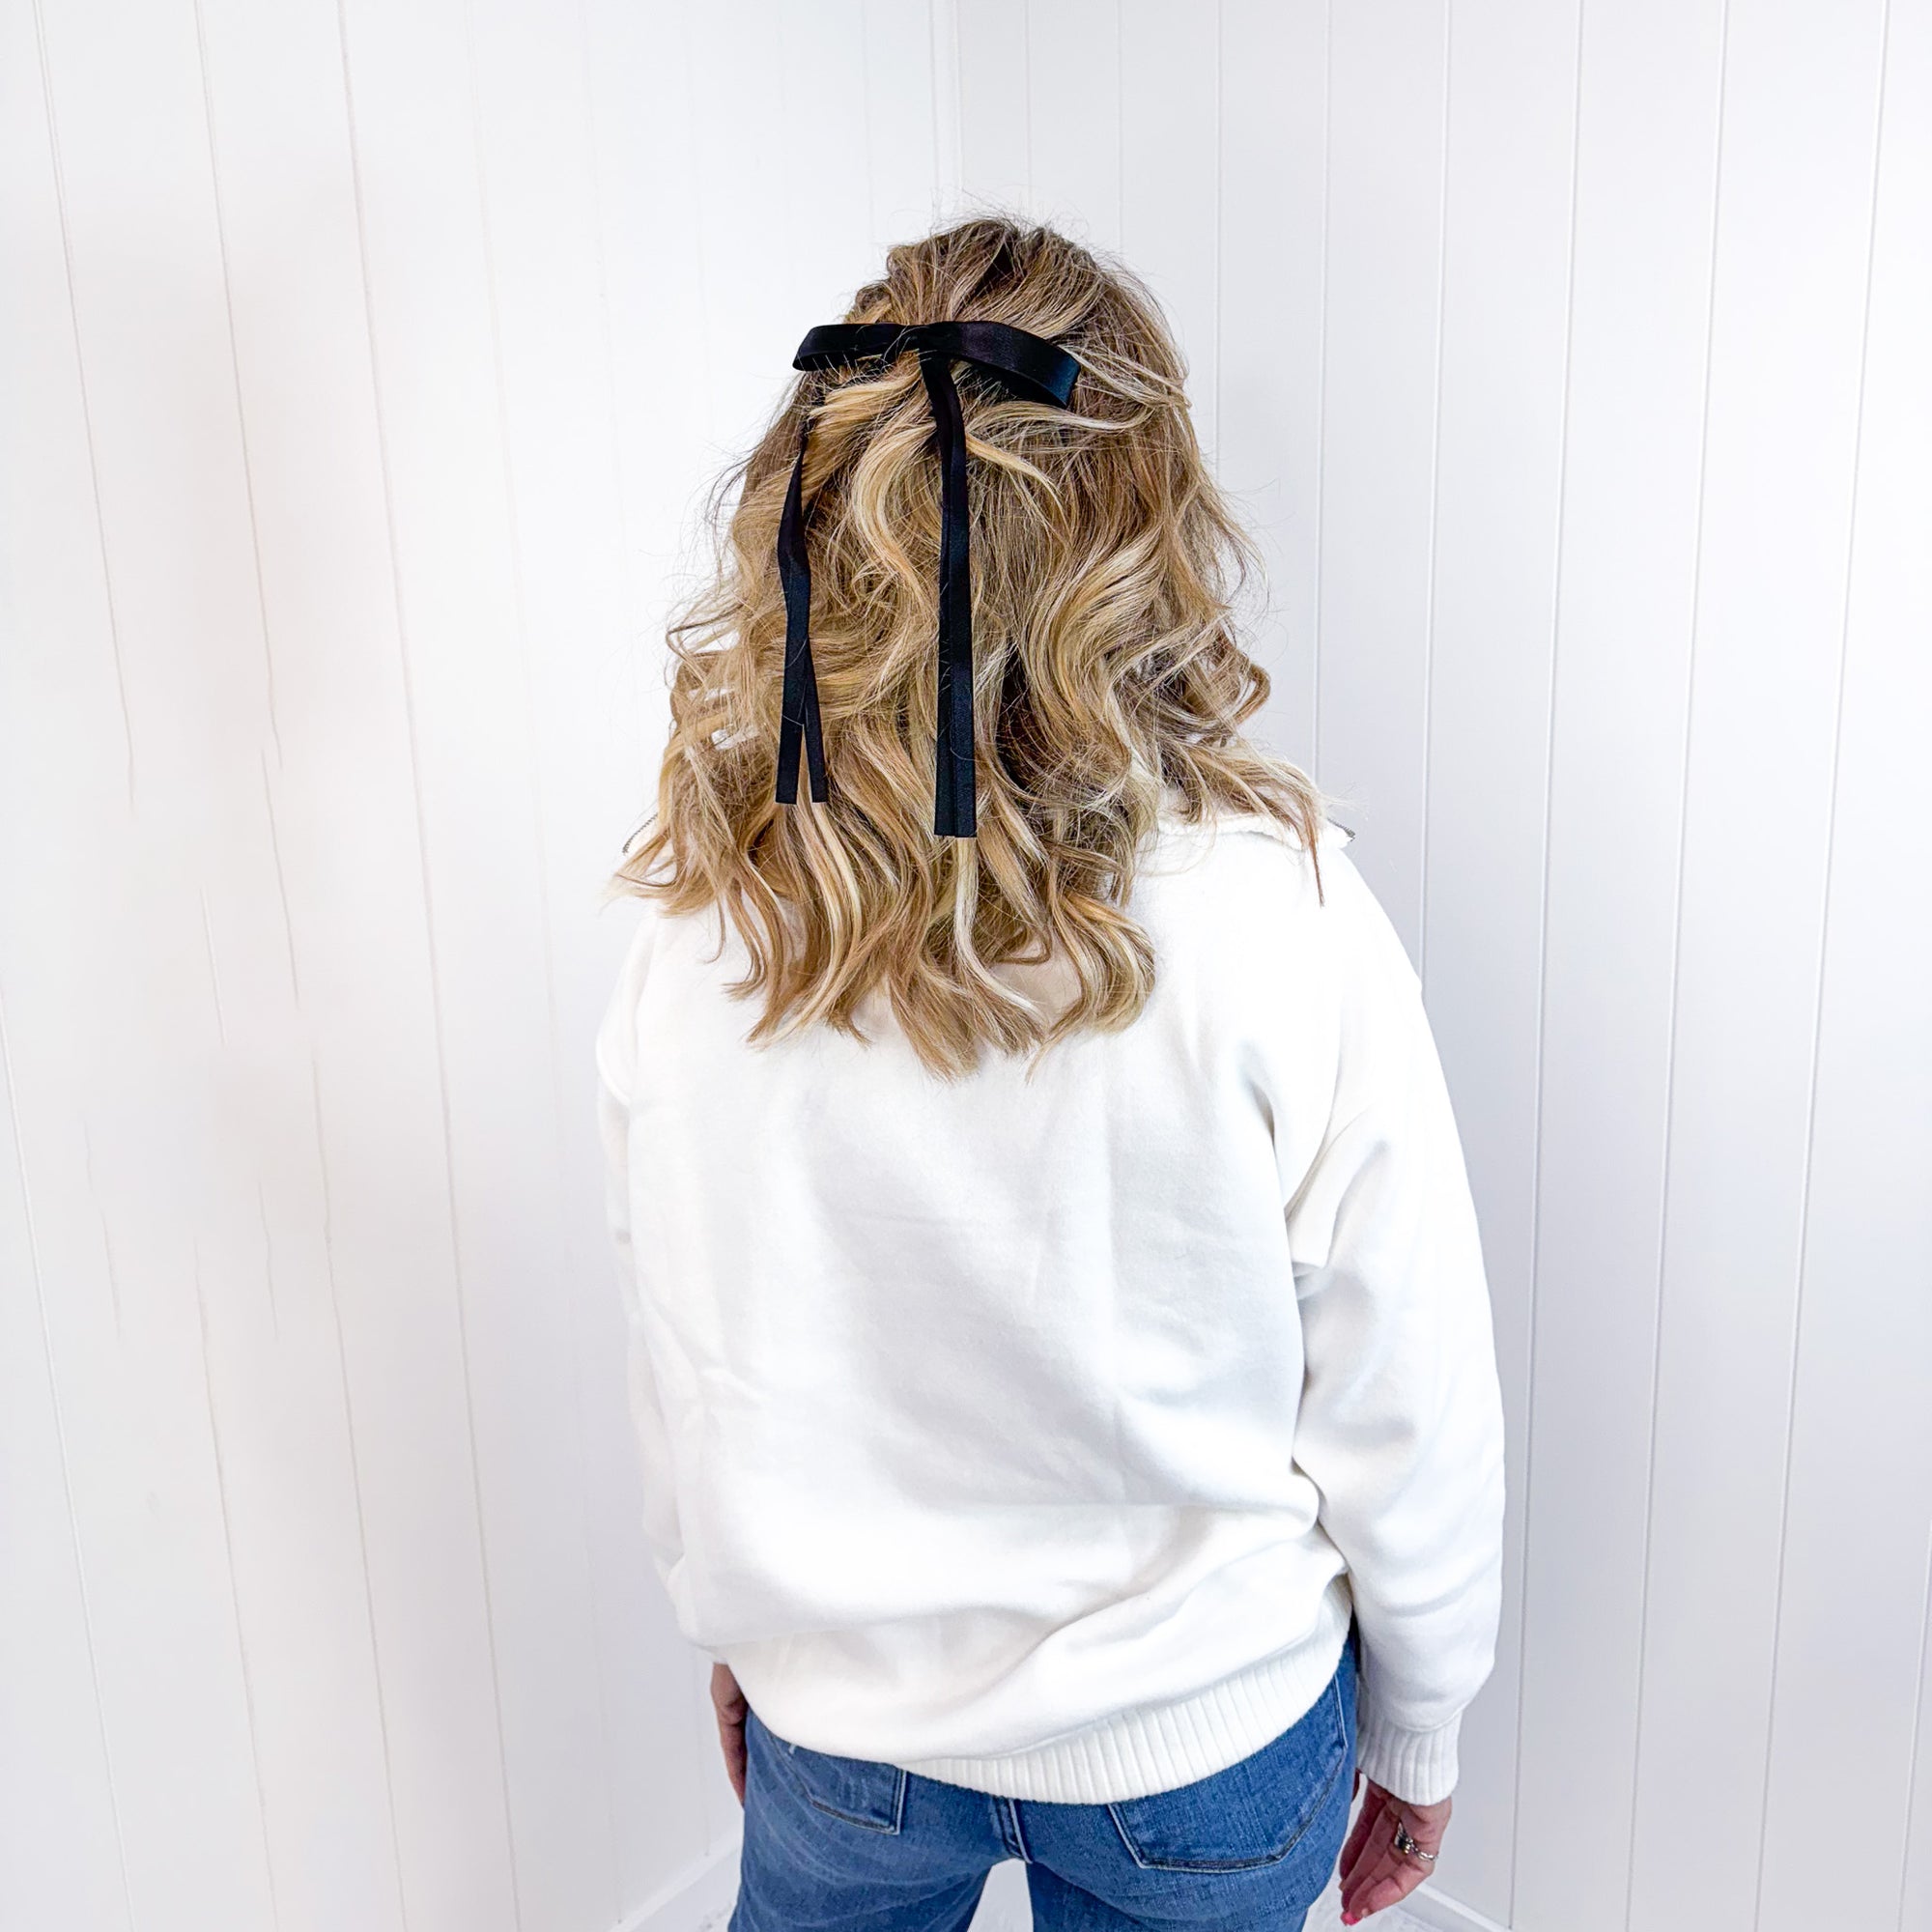 Soft Girly Era Clip on Bow in 5 Colors - Boujee Boutique 